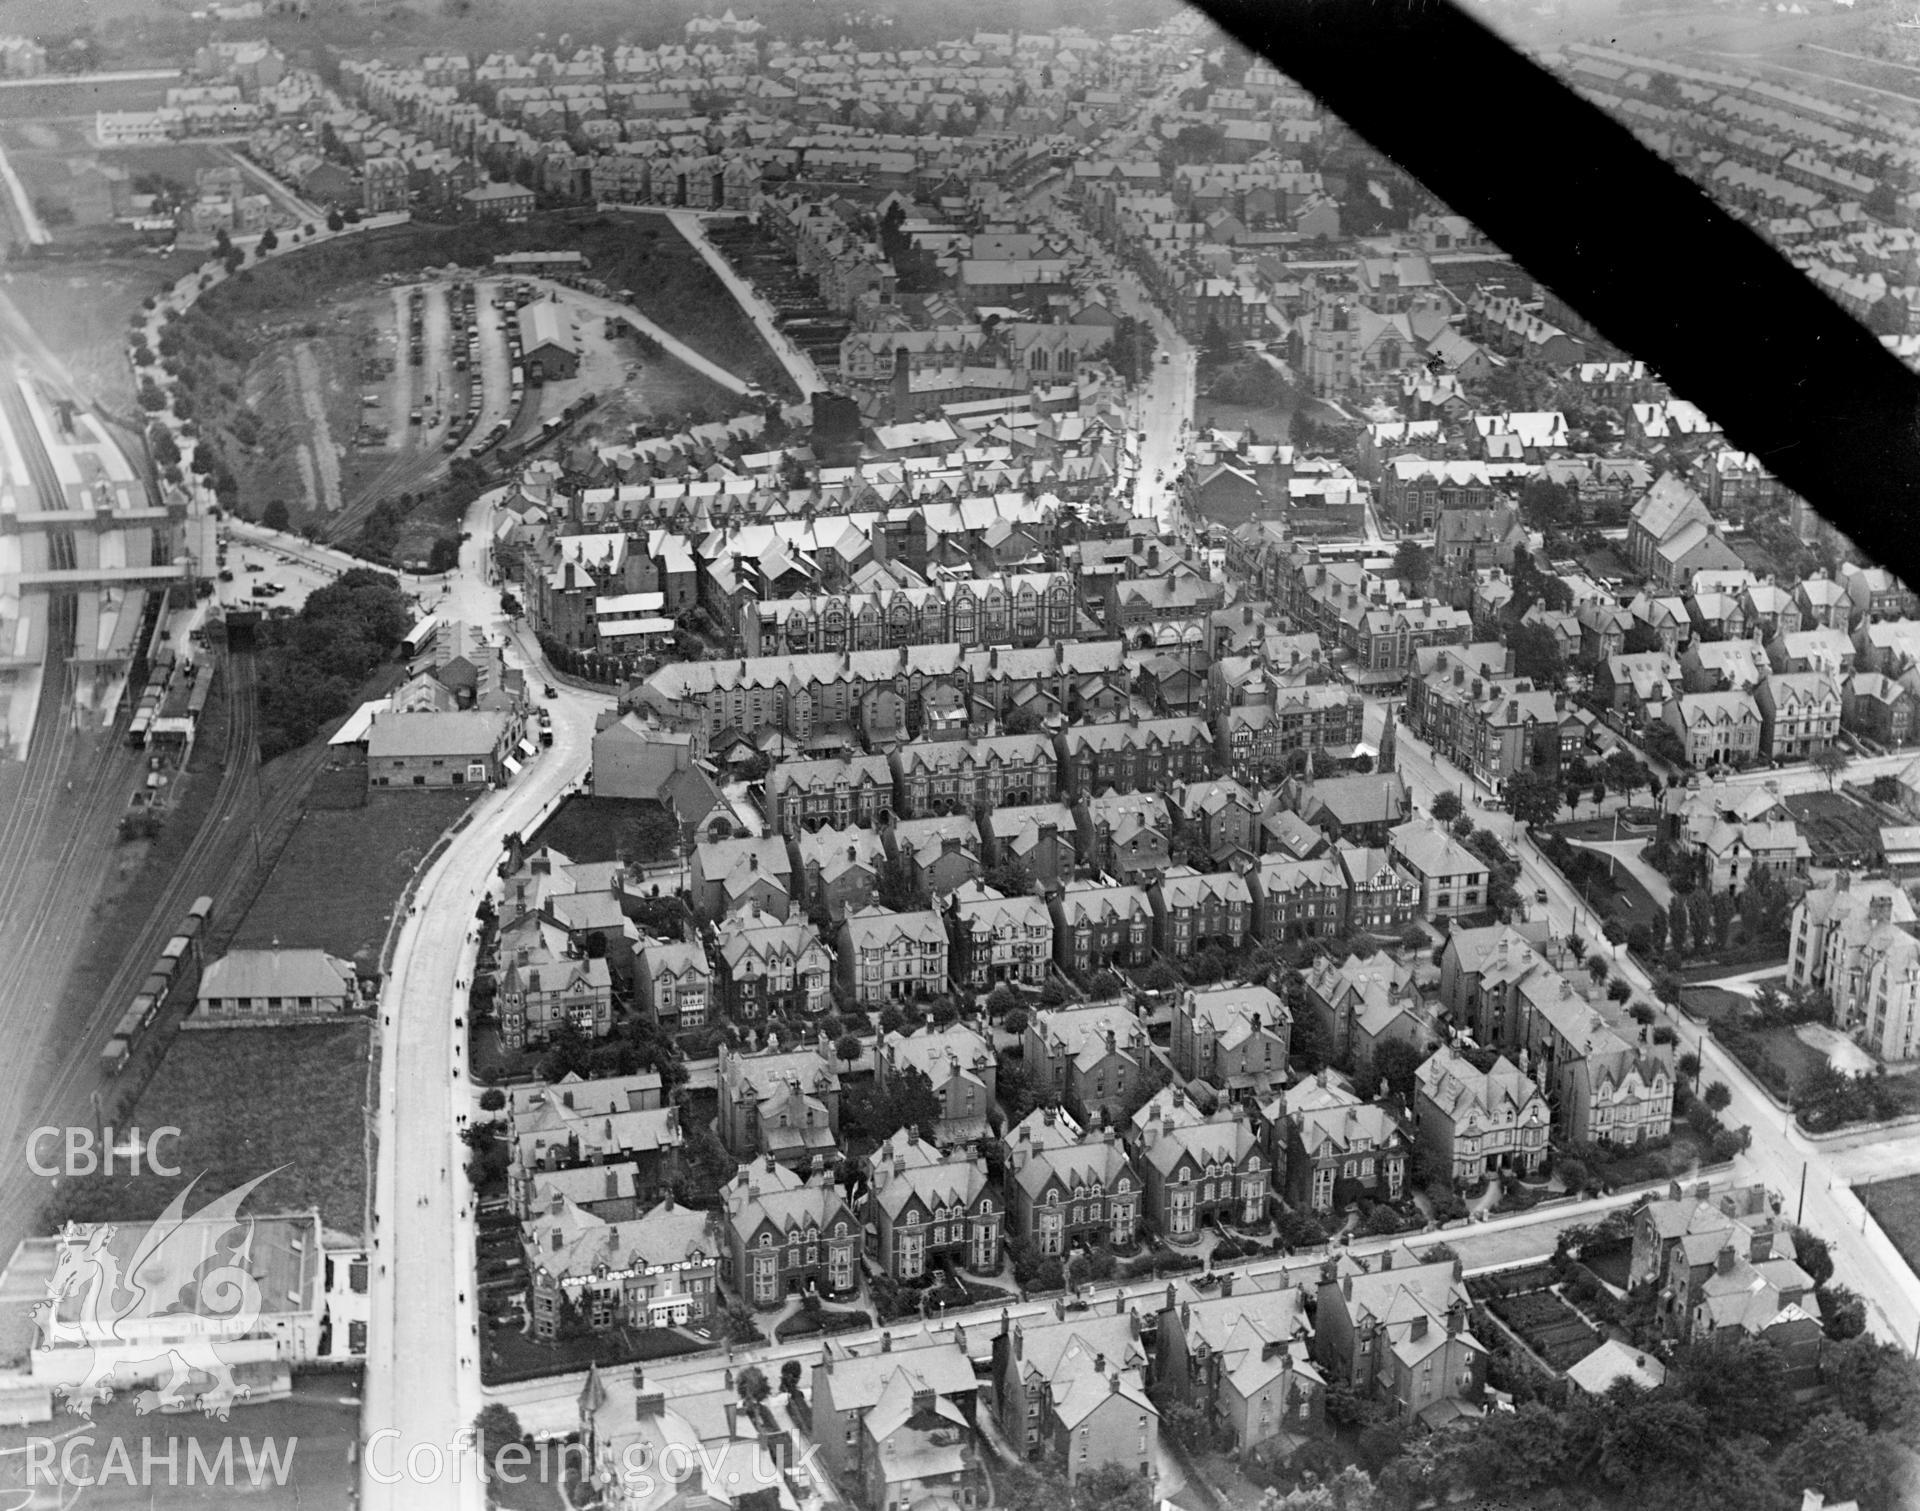 View of streets in Colwyn Bay, oblique aerial view. 5?x4? black and white glass plate negative.